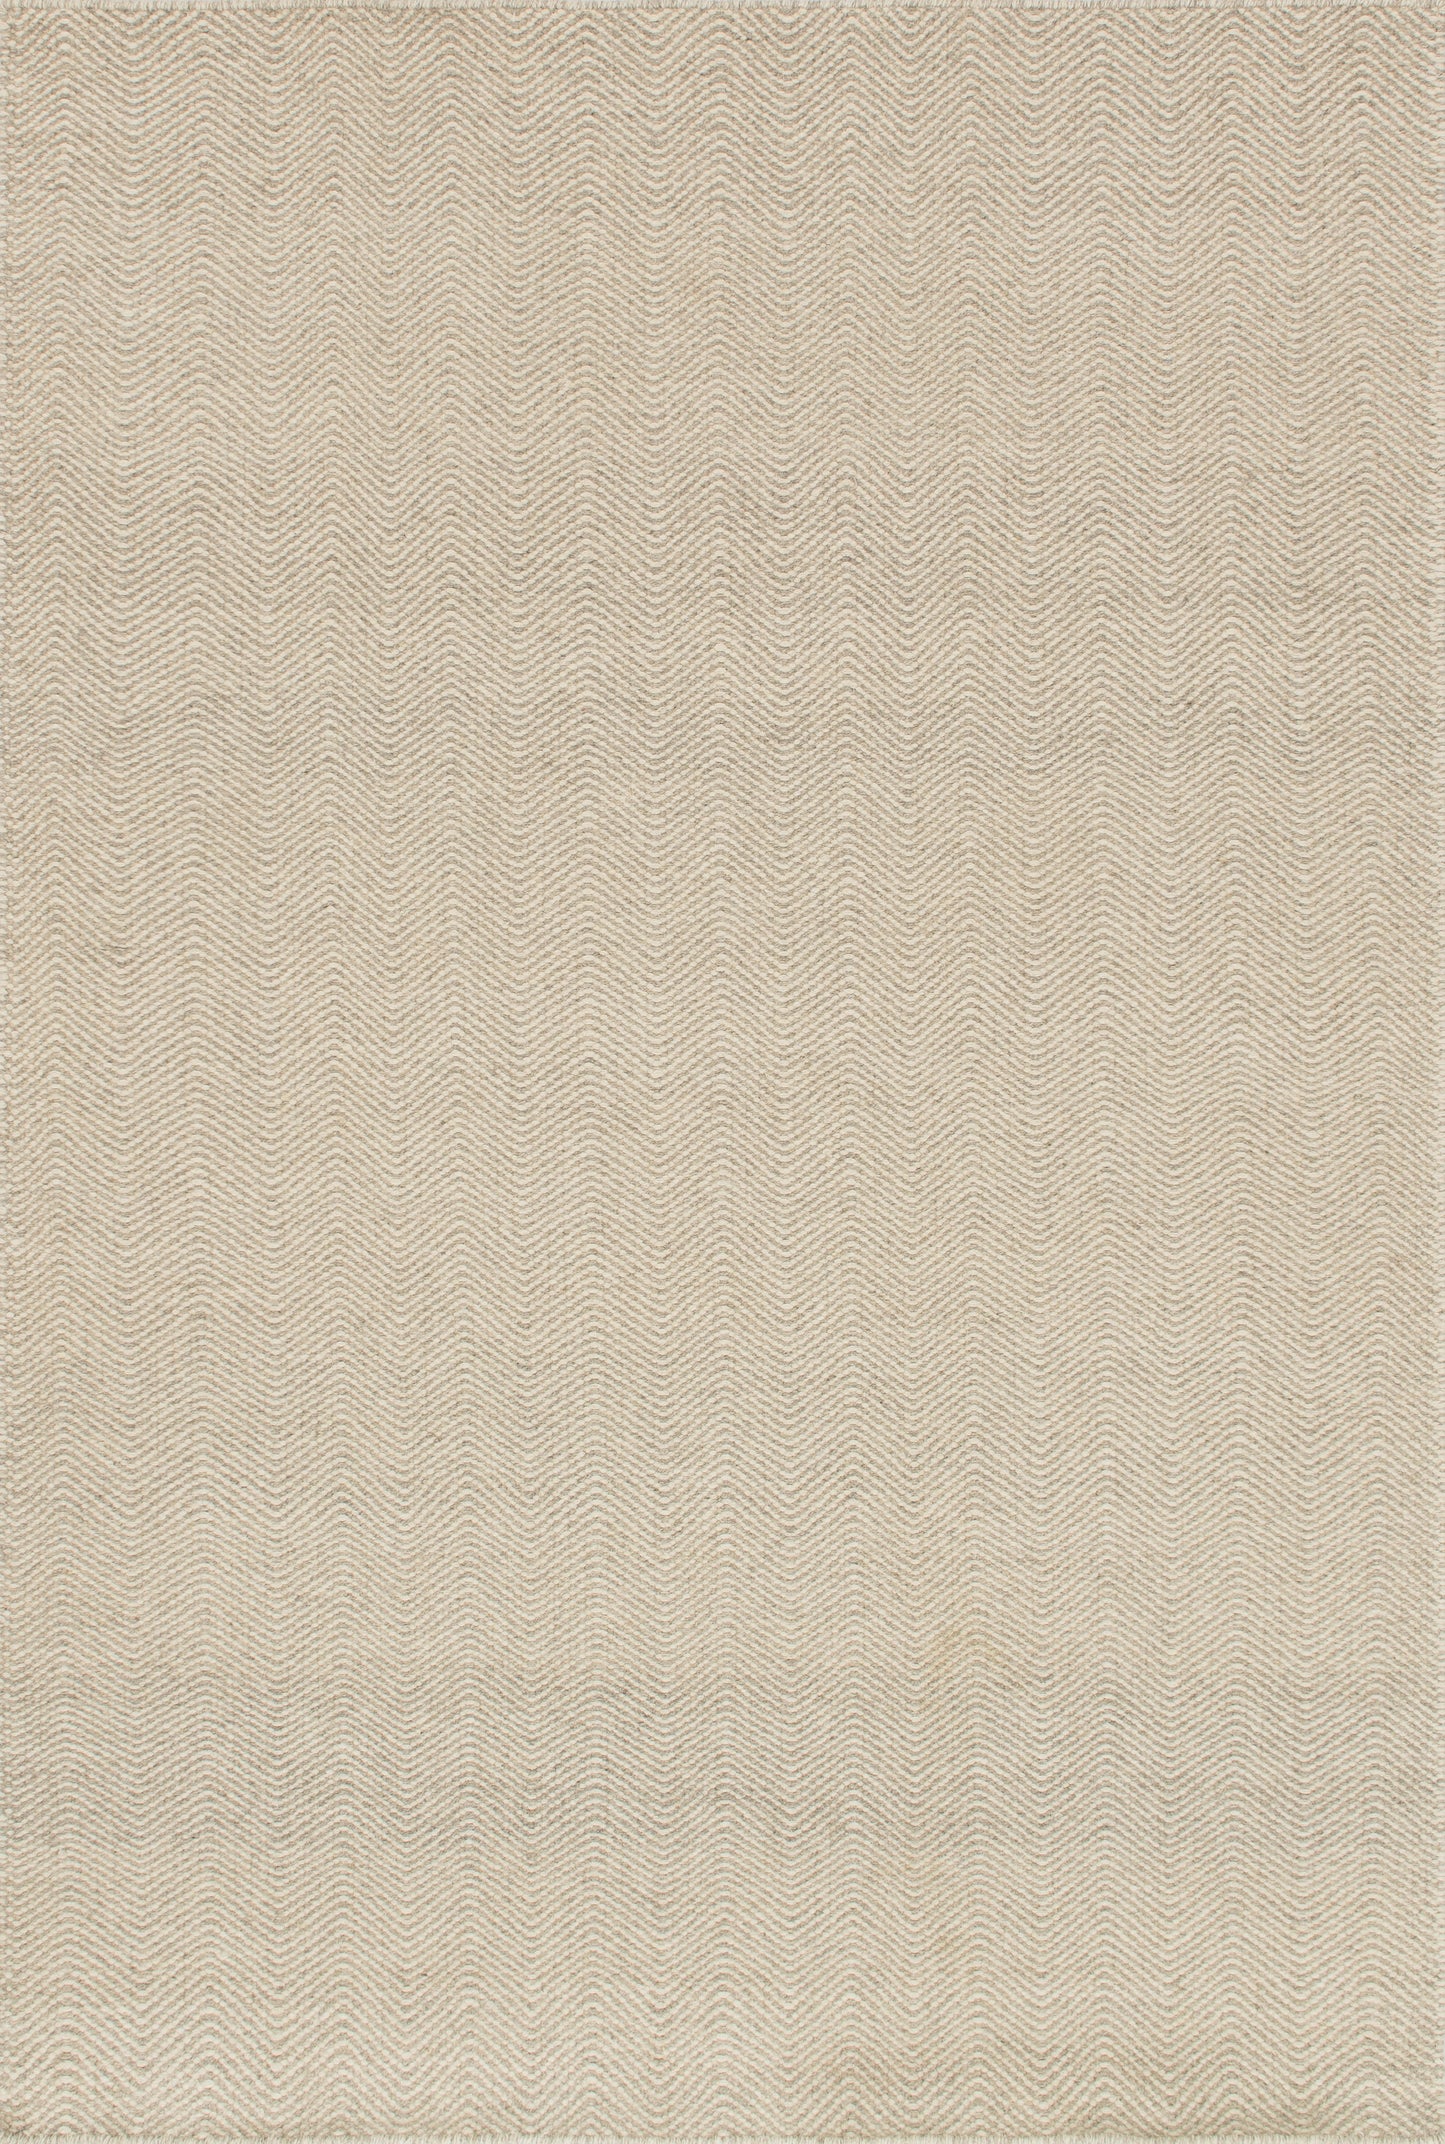 A picture of Loloi's Oakwood rug, in style OK-05, color Gravel